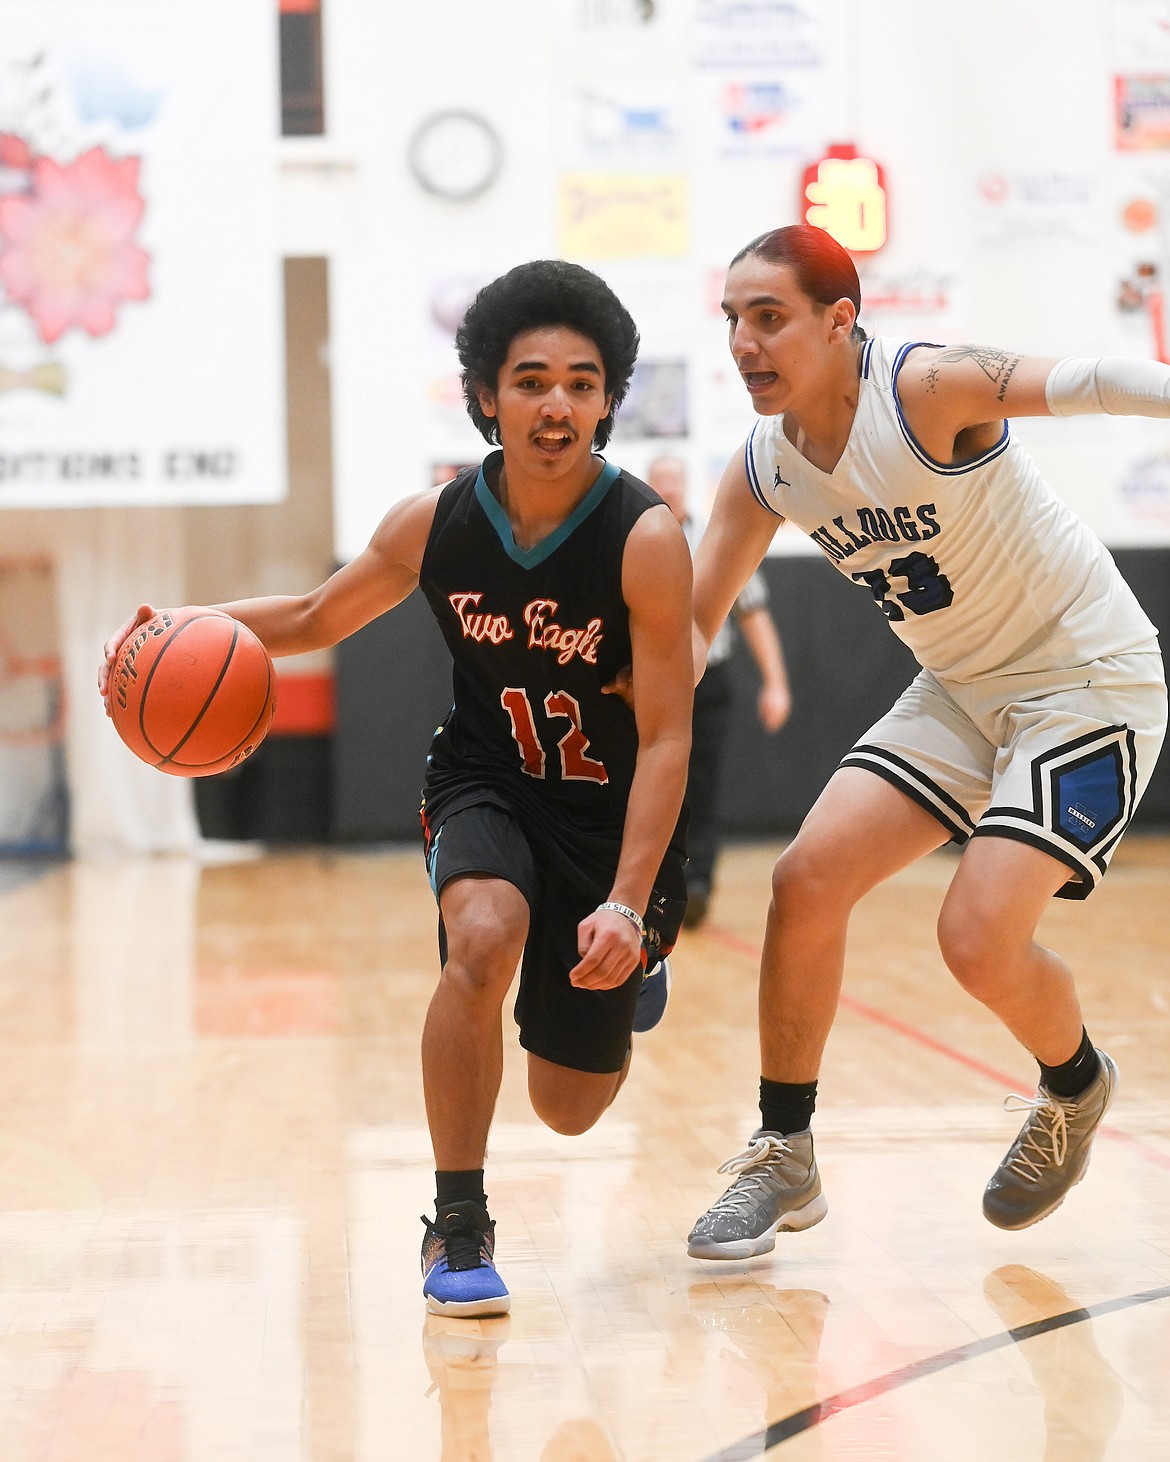 Malacye Piatpot (Two Eagle) races down the floor, flanked by Landon Walks Over Ice (Mission) during the Mission Valley All Star game last Tuesday in Ronan. (Christa Umphrey photo)